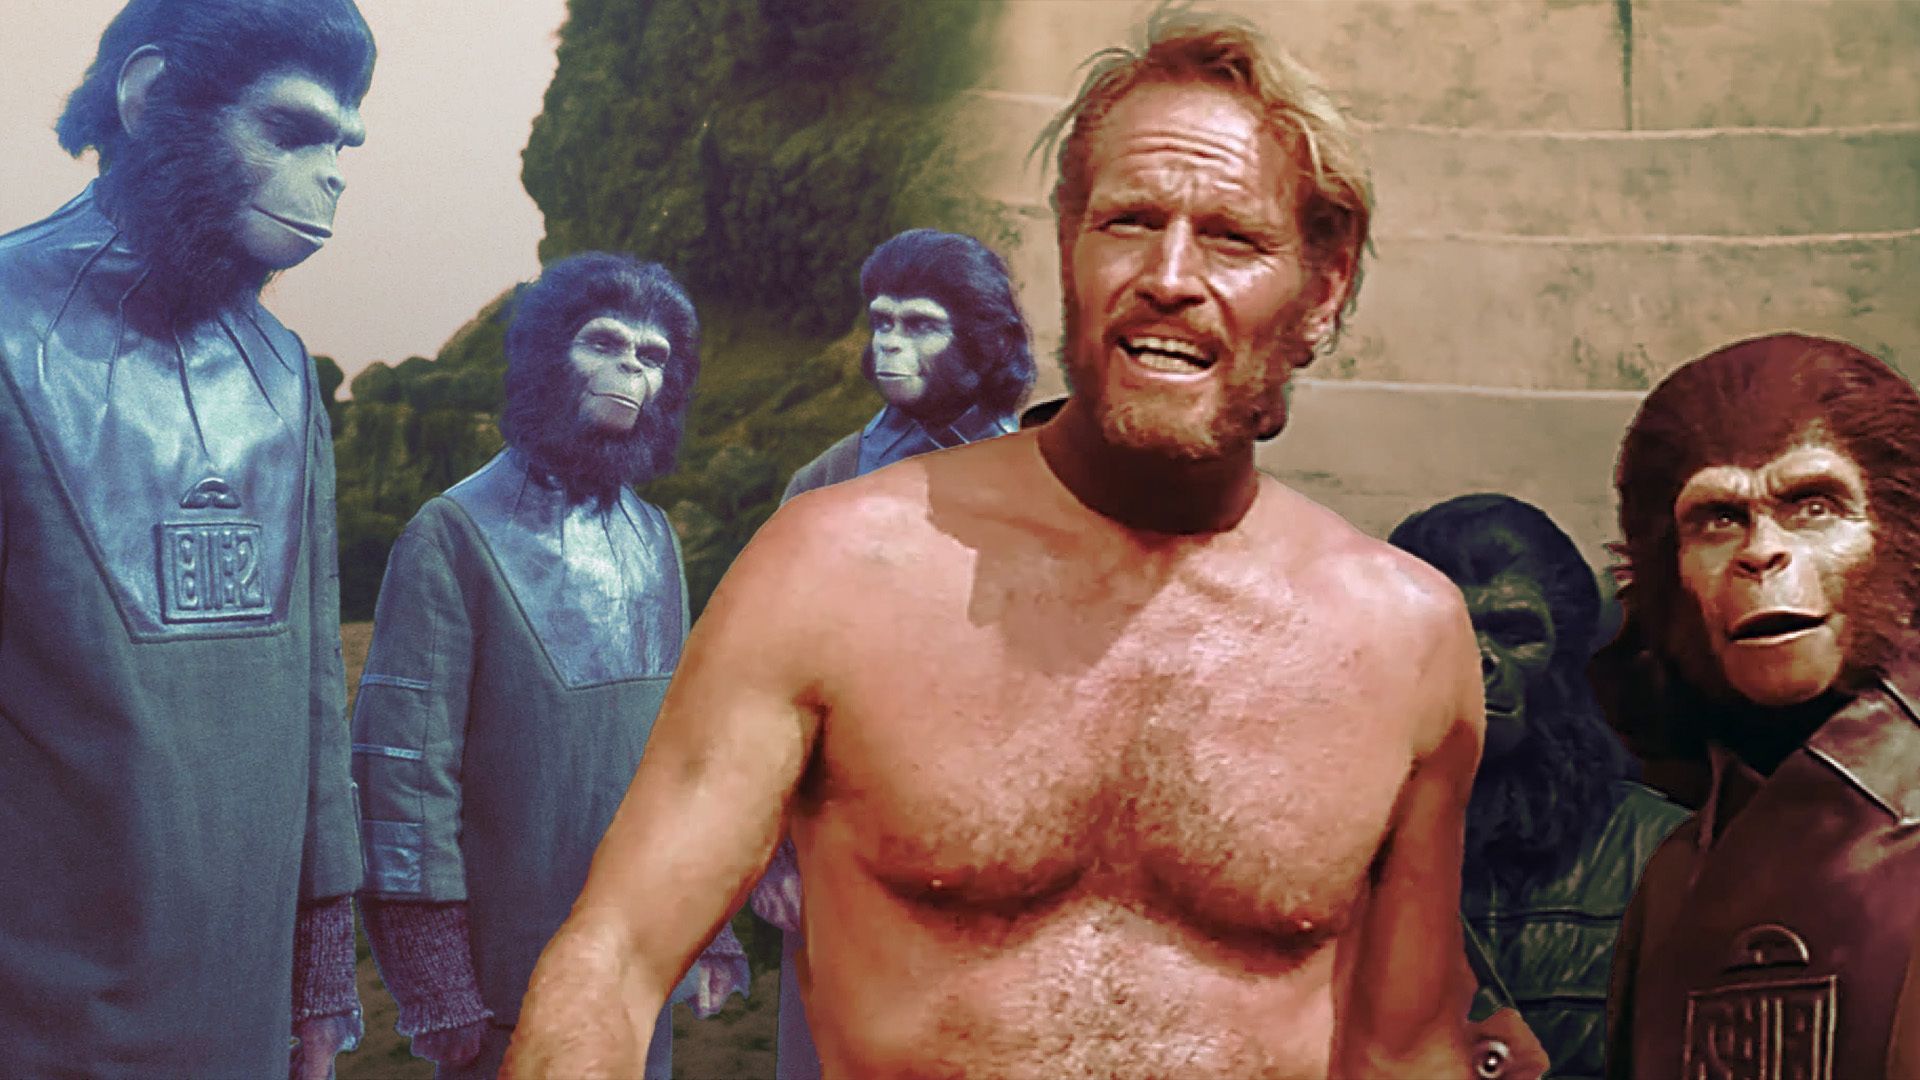 X Major Plot Points From the Planet of the Apes Book That Never Made It Into the Movies